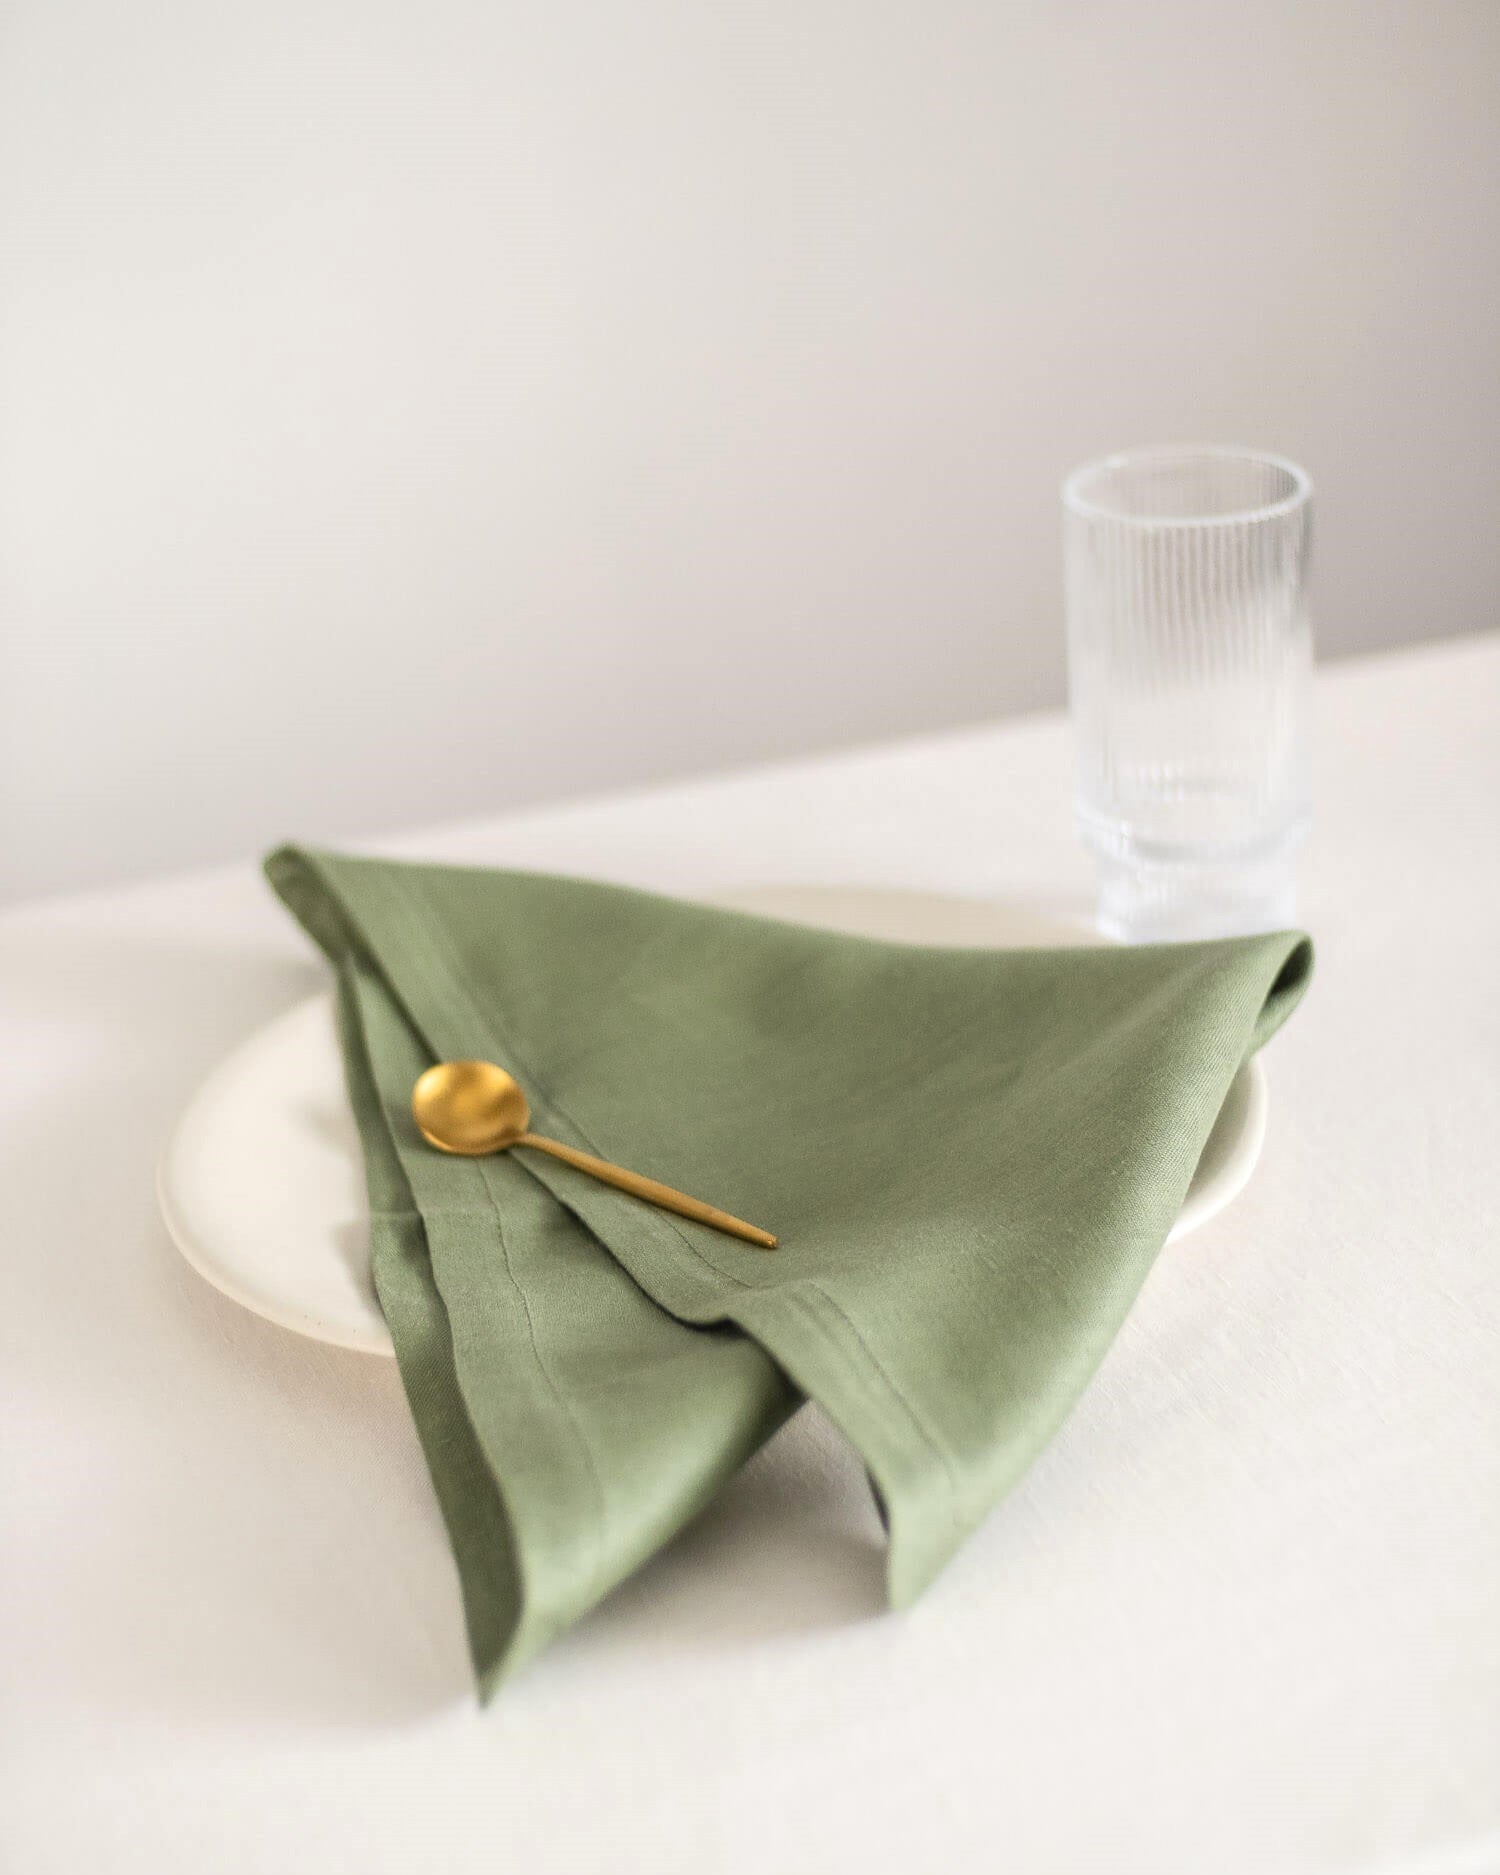 ava and ava ph sage green pure linen table napkin on off-white plate, folded into triangular shape, with wooden golden spoon and water glass